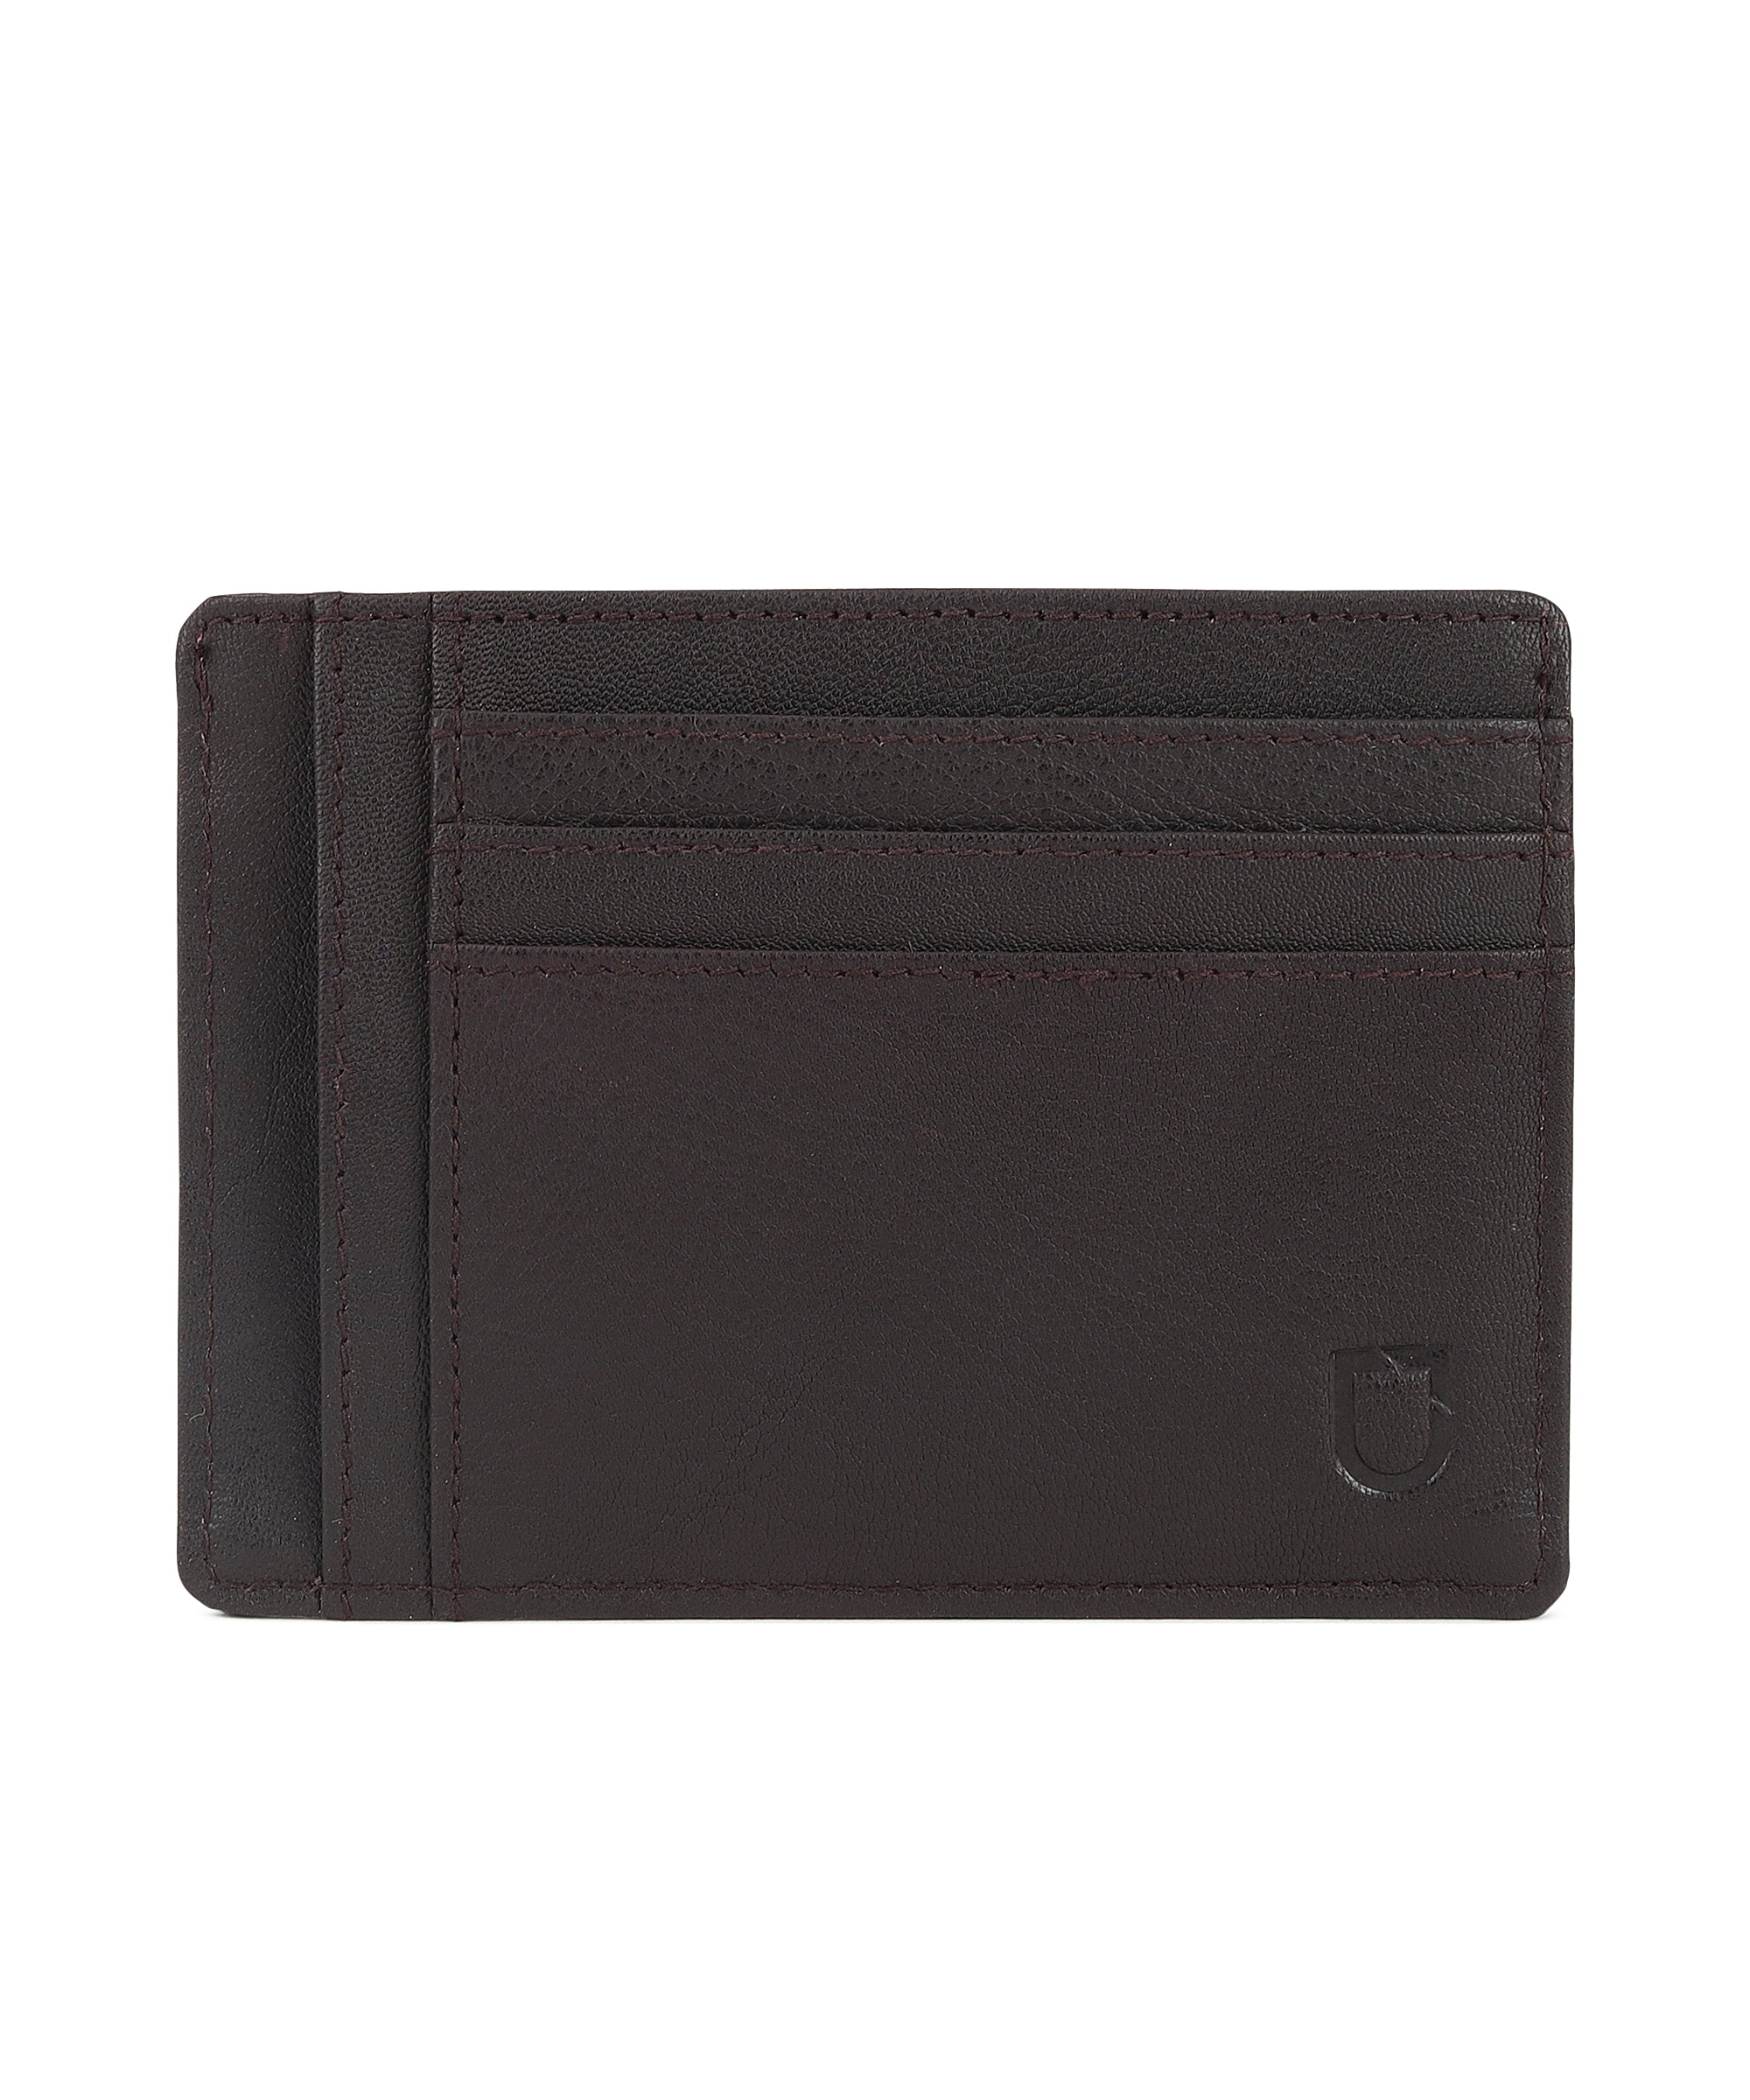 Urbano Fashion Men's Casual, Formal Brown Genuine Leather Wallet-5 Card Slots